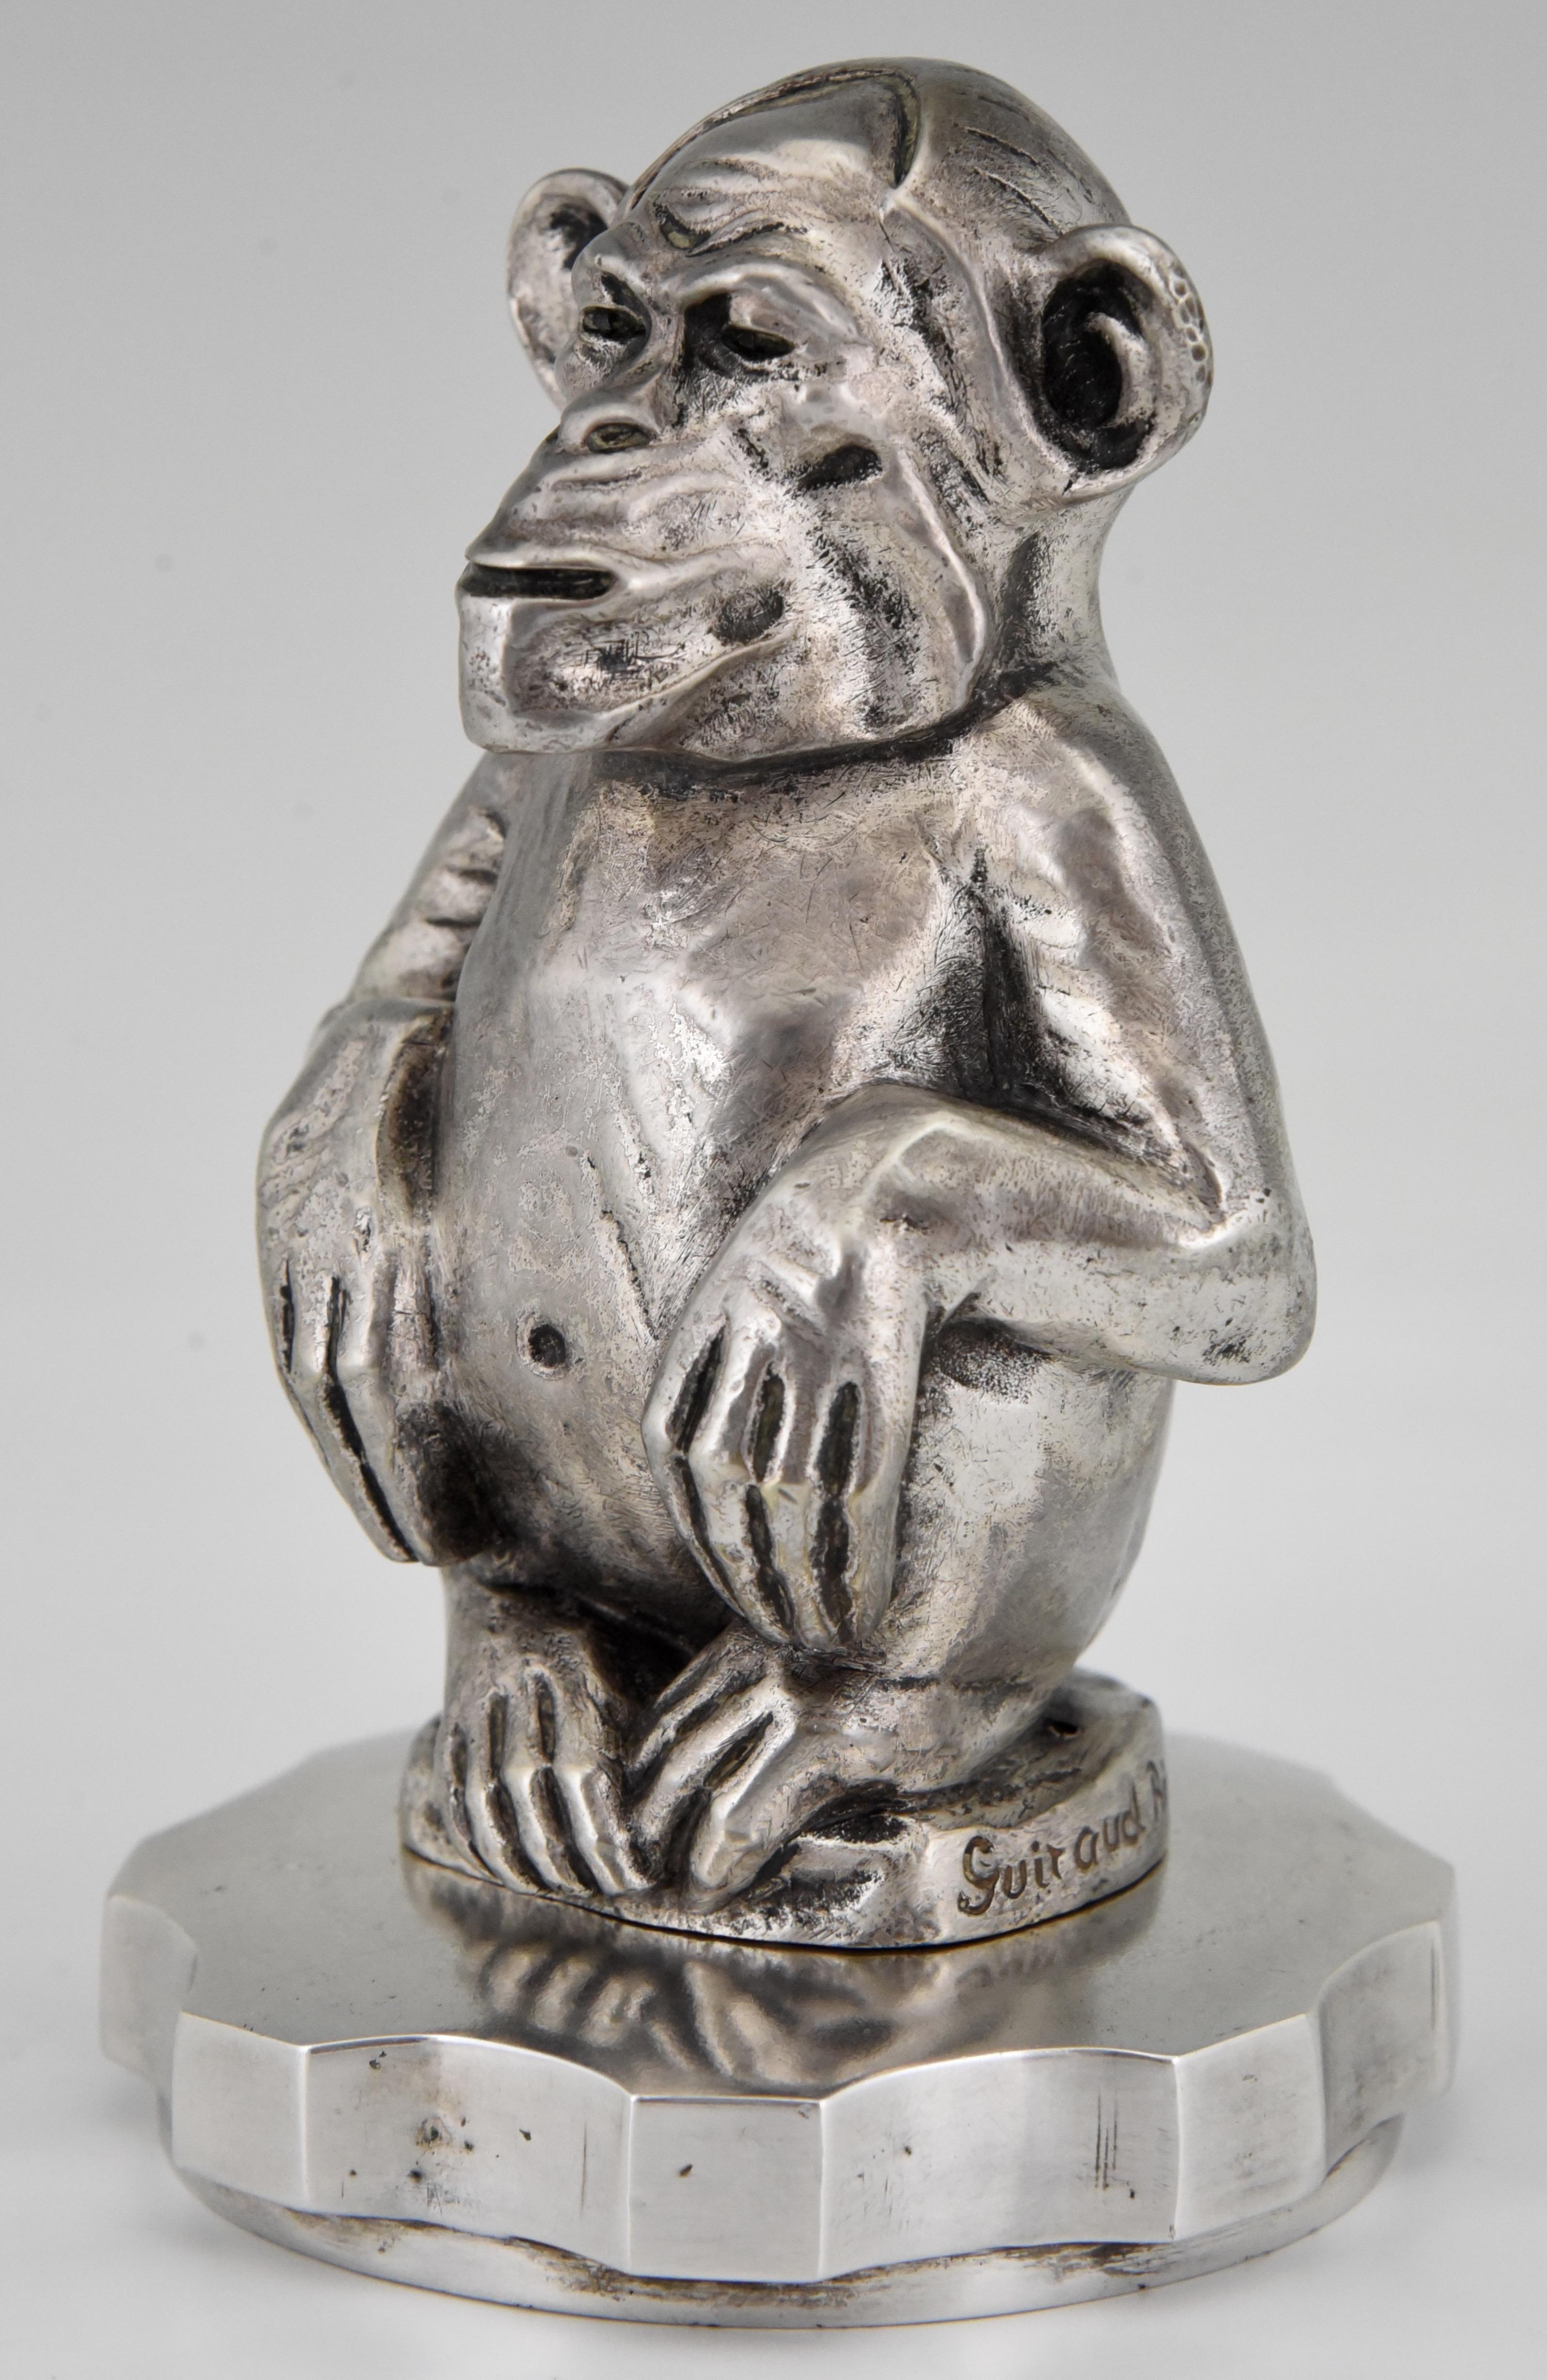 Art Deco bronze sculpture, car mascot sitting chimpanzee monkey.
The bronze has a silver patina and is fixed on a radiator cap.
Signed by the French artist Maurice Guiraud Rivière, circa 1920.

Literature:
This car mascot is illustrated in: